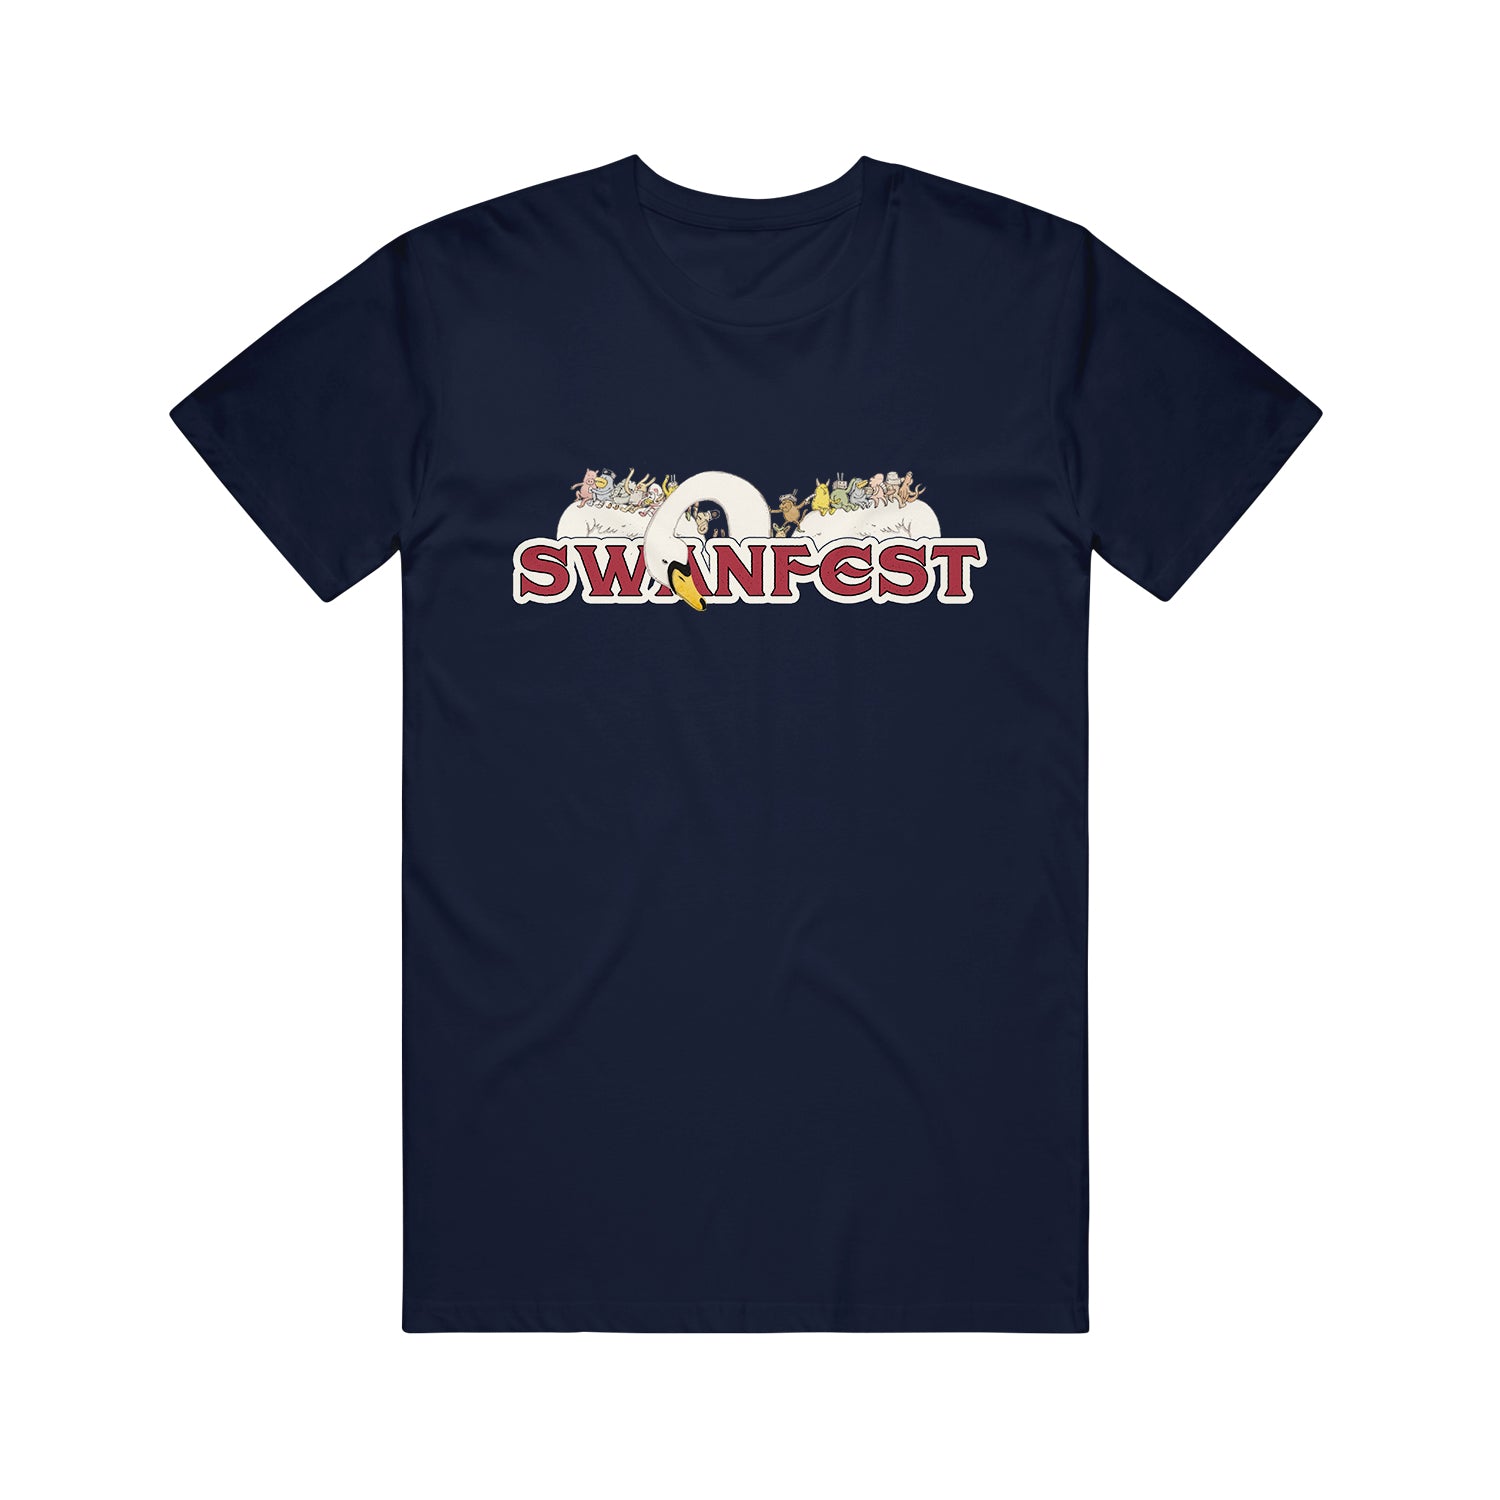 image of a navy tee shirt on a white background, the tee has a print across the chest of a white swan with characters across the wings, and says swanfest below in red